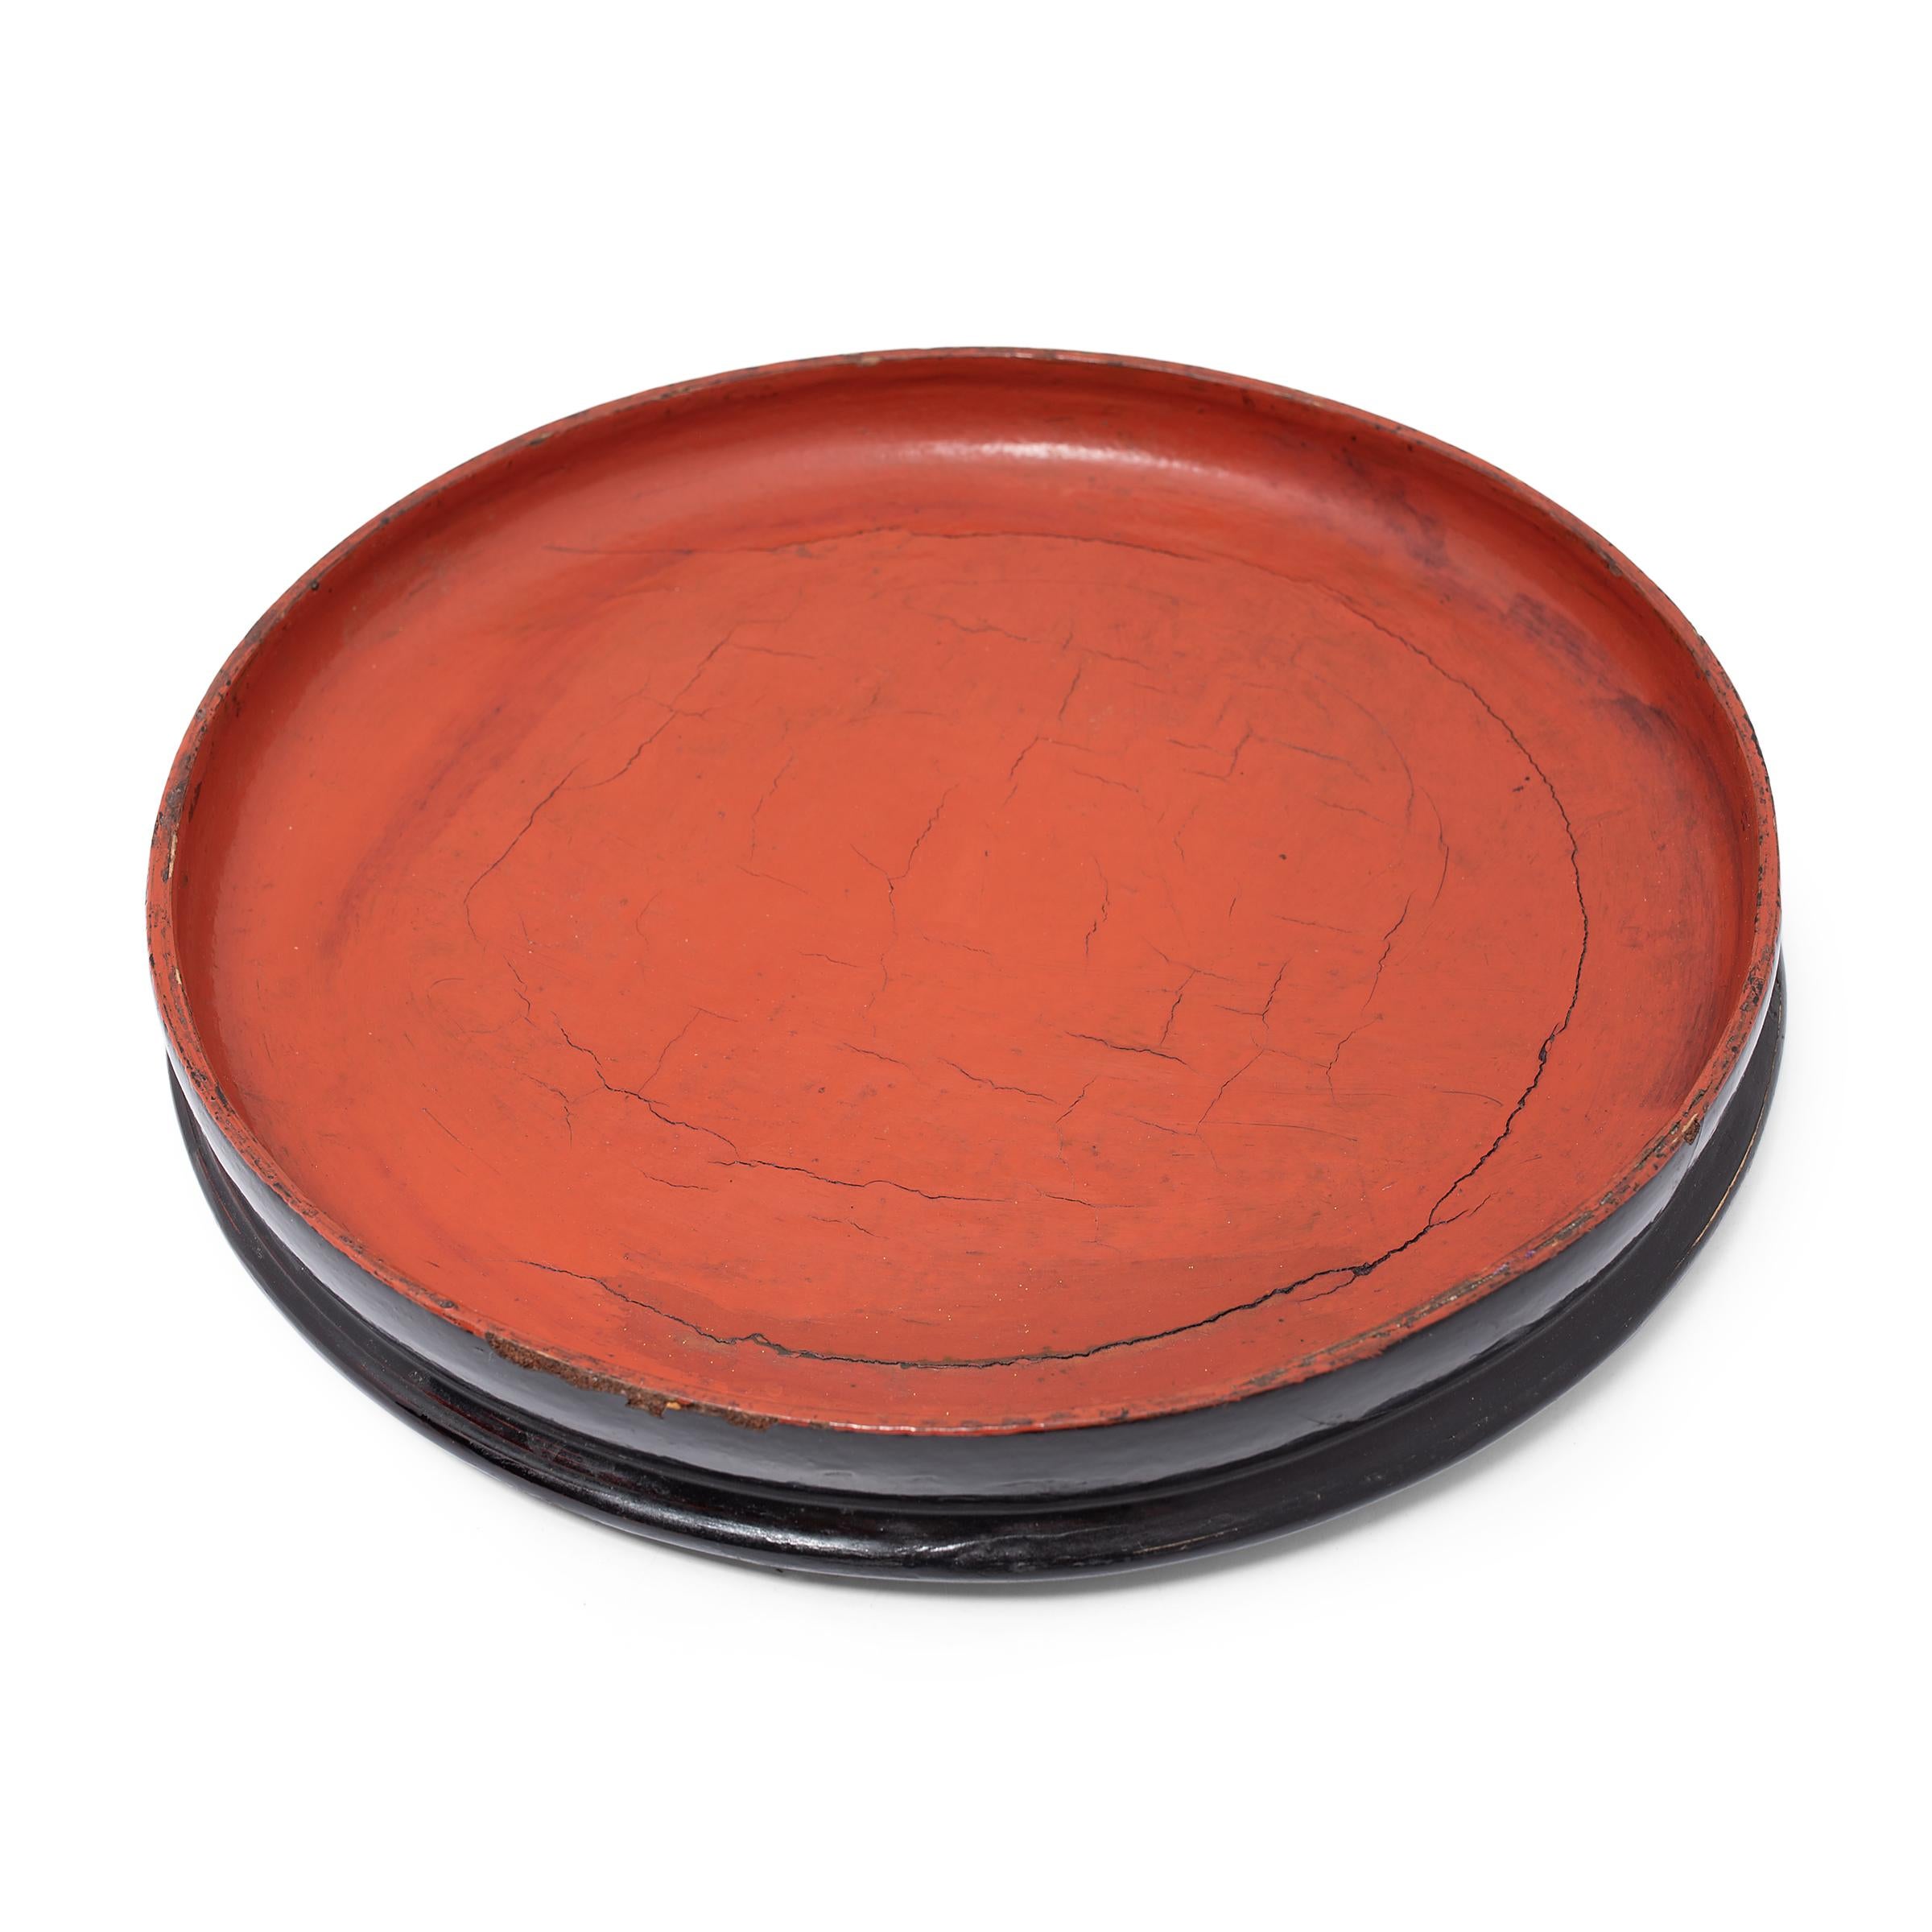 This round footed tray dates to the early 20th century and is a simple example of Burmese lacquerware. The tray is formed of thin bamboo strips that have been woven and coiled into shape, held in place with a putty of lacquer and sawdust, and